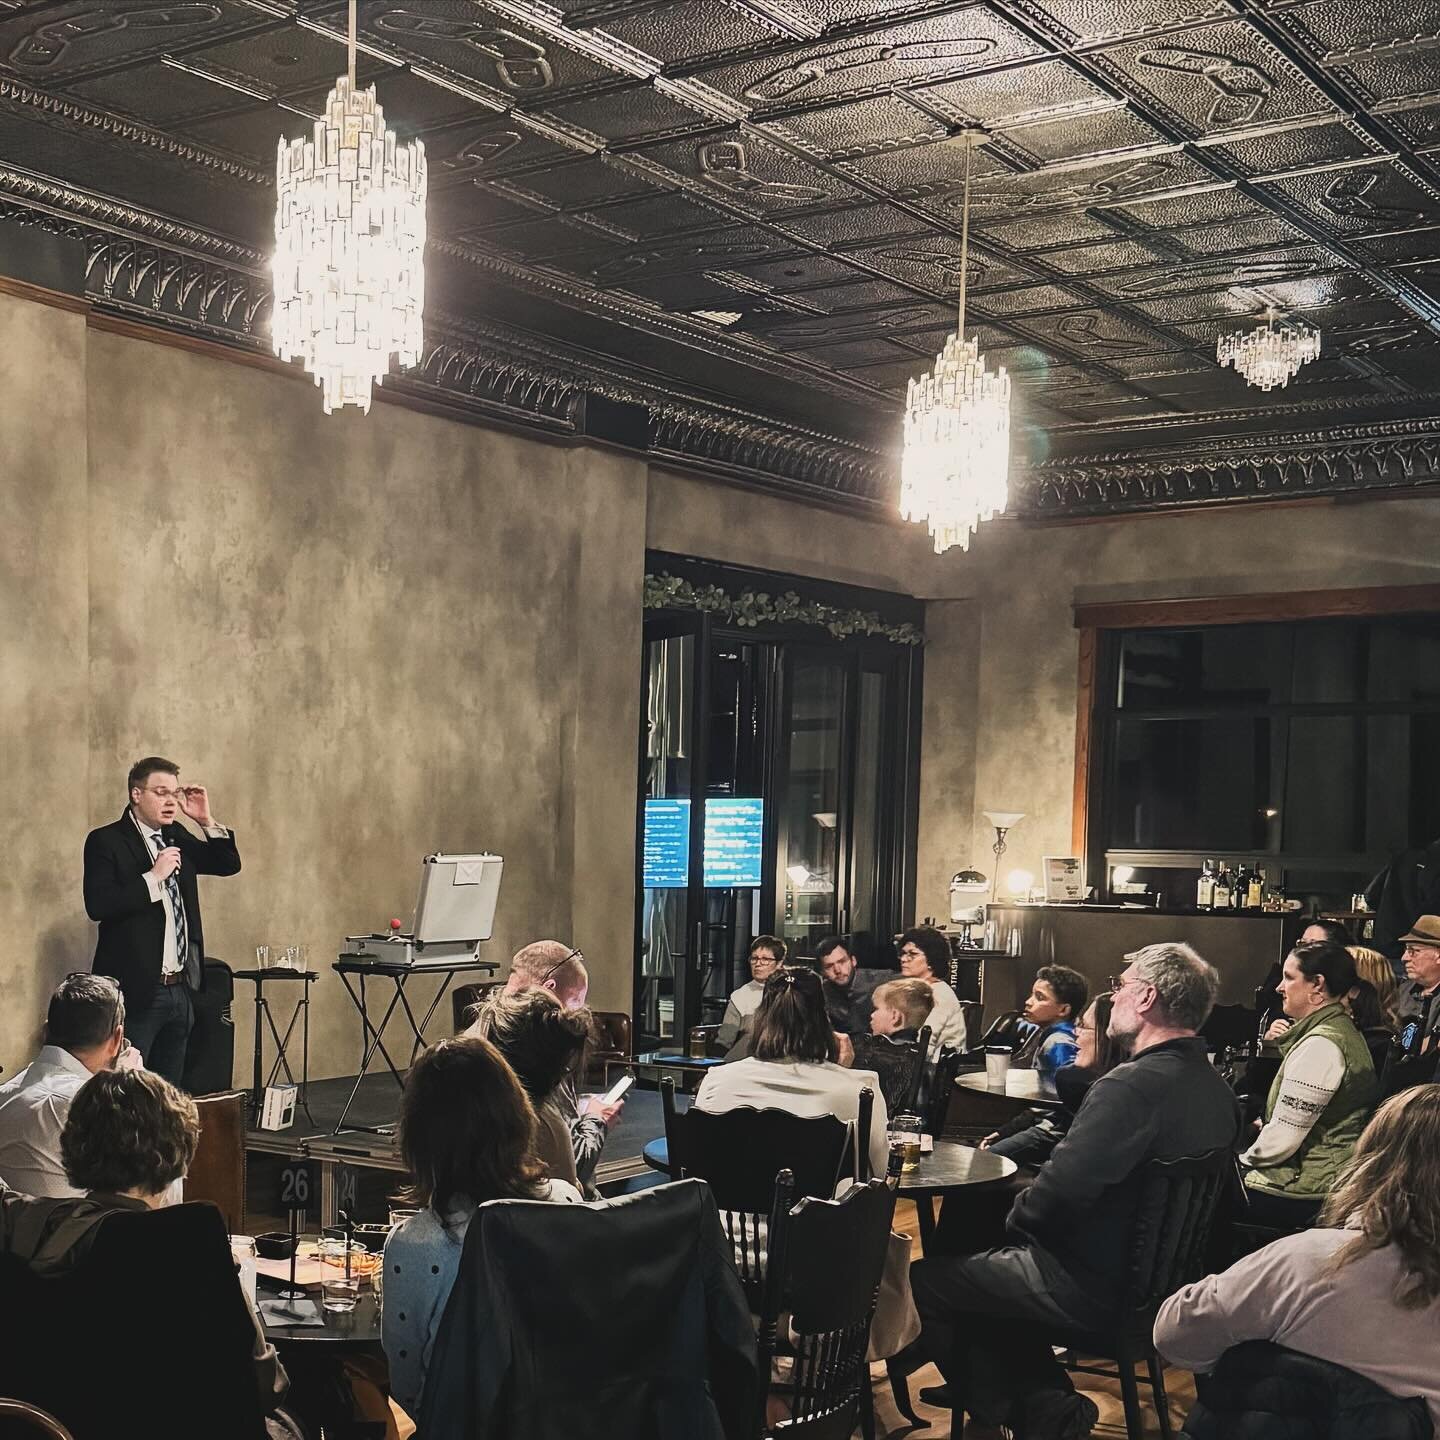 A hit night of magic and comedy at @thefarmandtheoddfellows in Minneapolis, KS! I stuck around after the show to mingle with the crowd and do some magic tricks, and a good amount of people had driven from up to 90 minutes away for it - I was so flatt